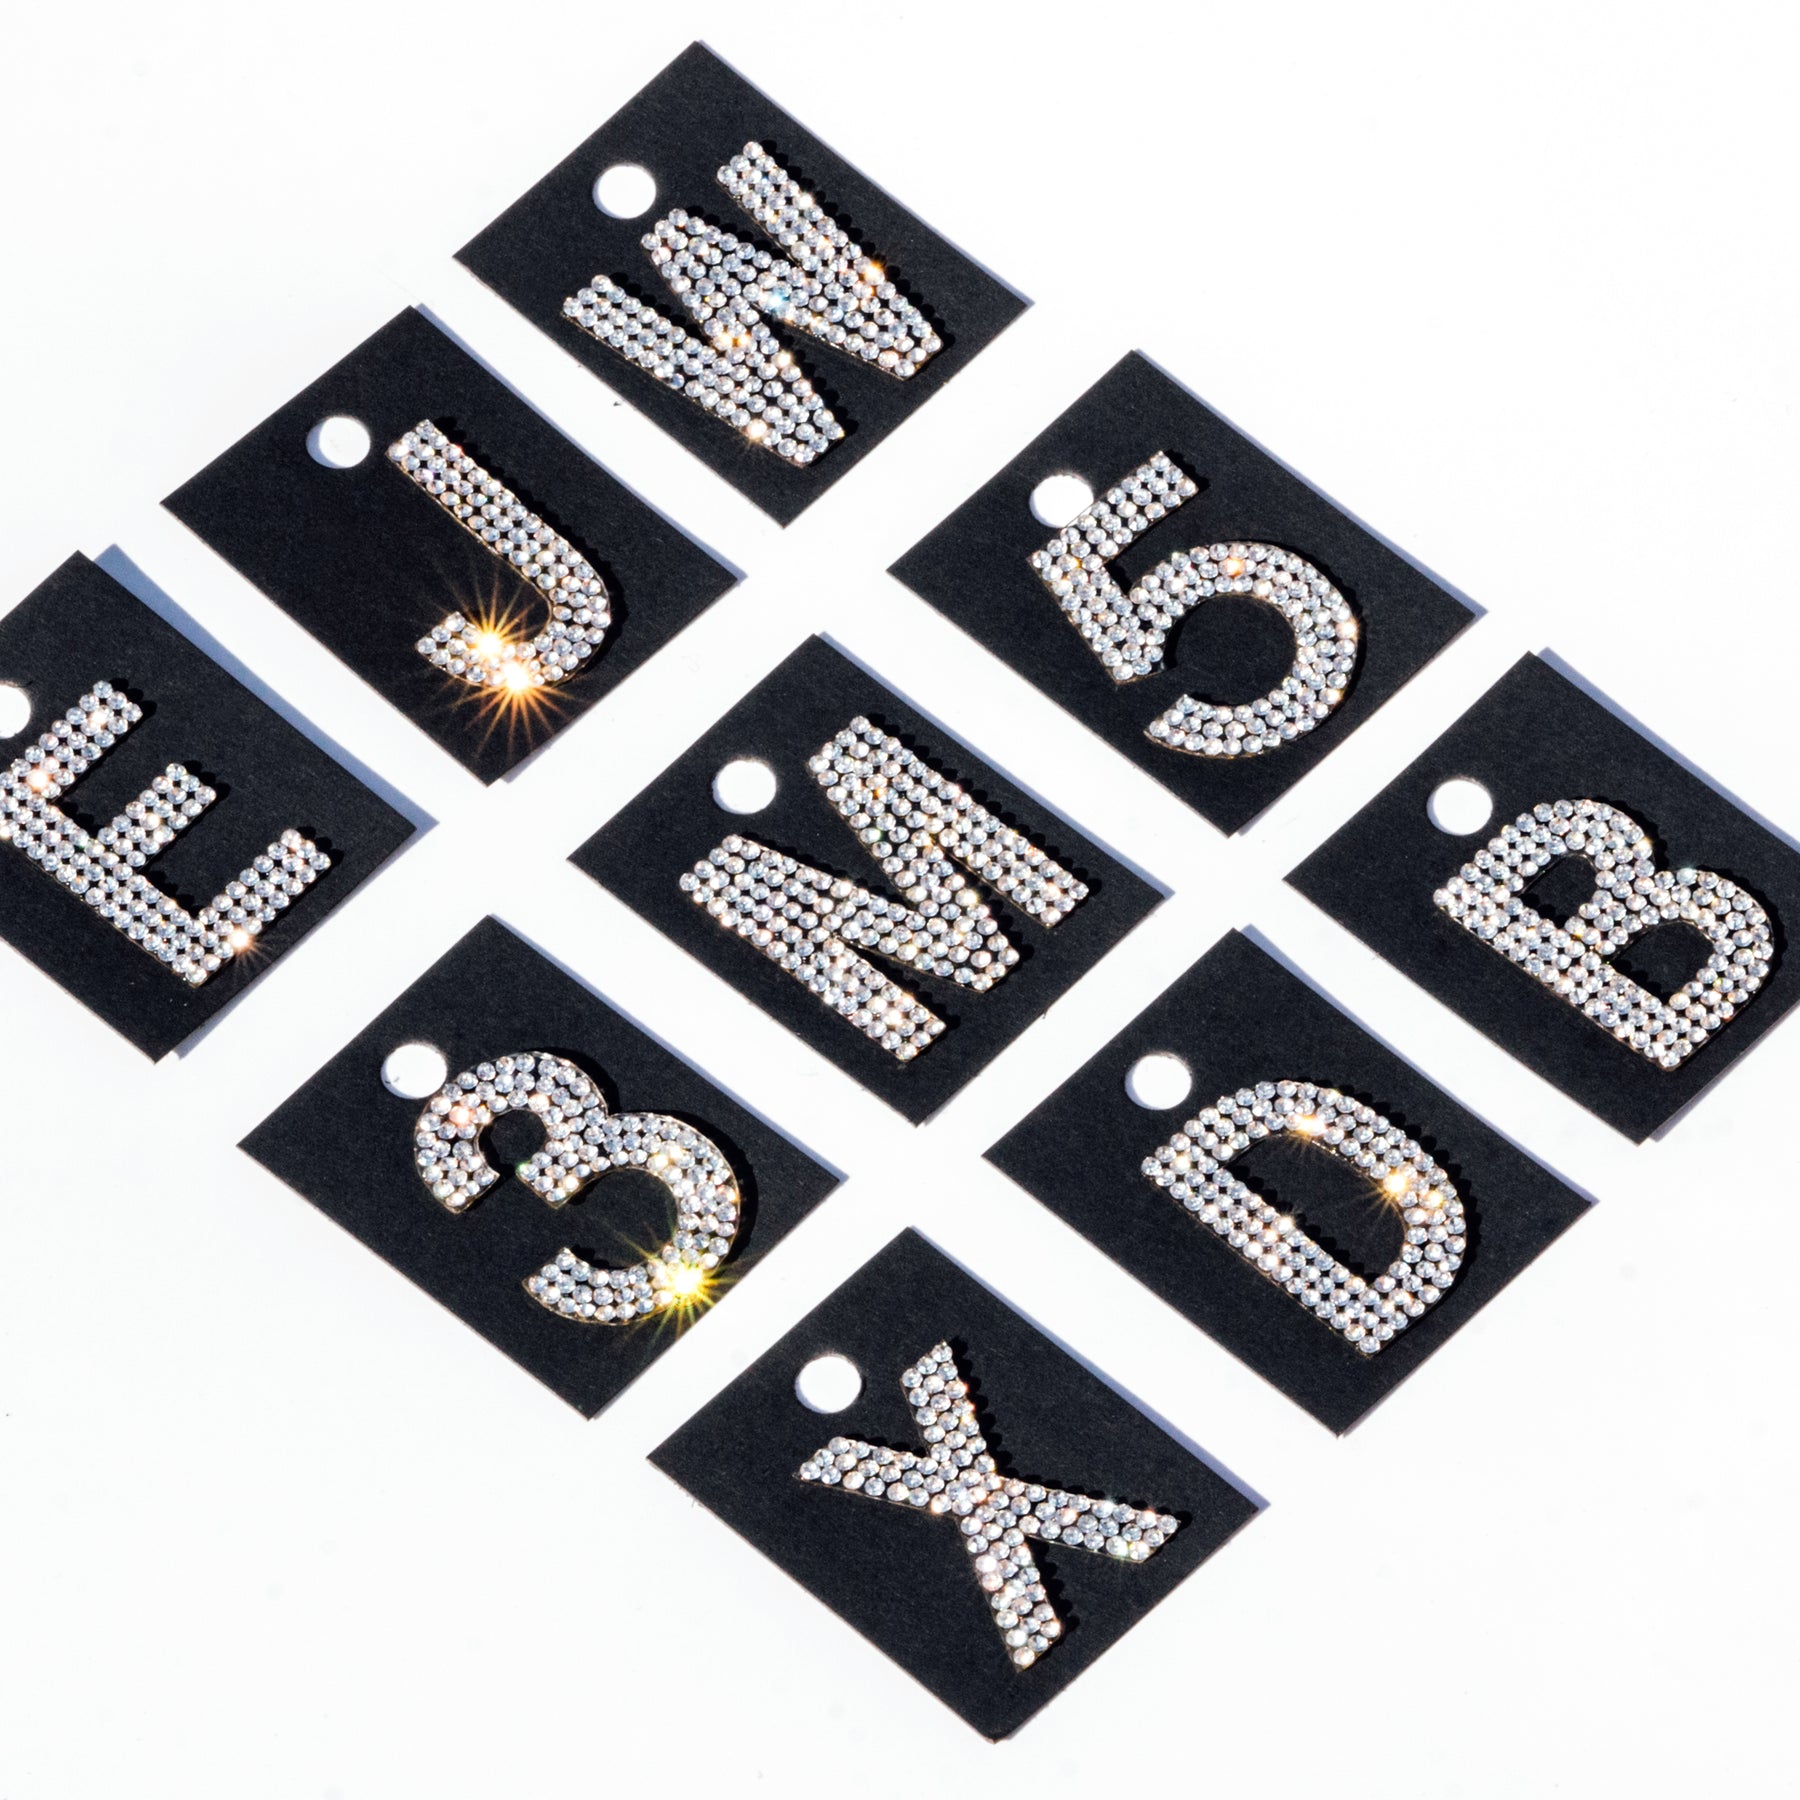 3 Rhinestone Iron on Numbers Crystal Letter Patch 